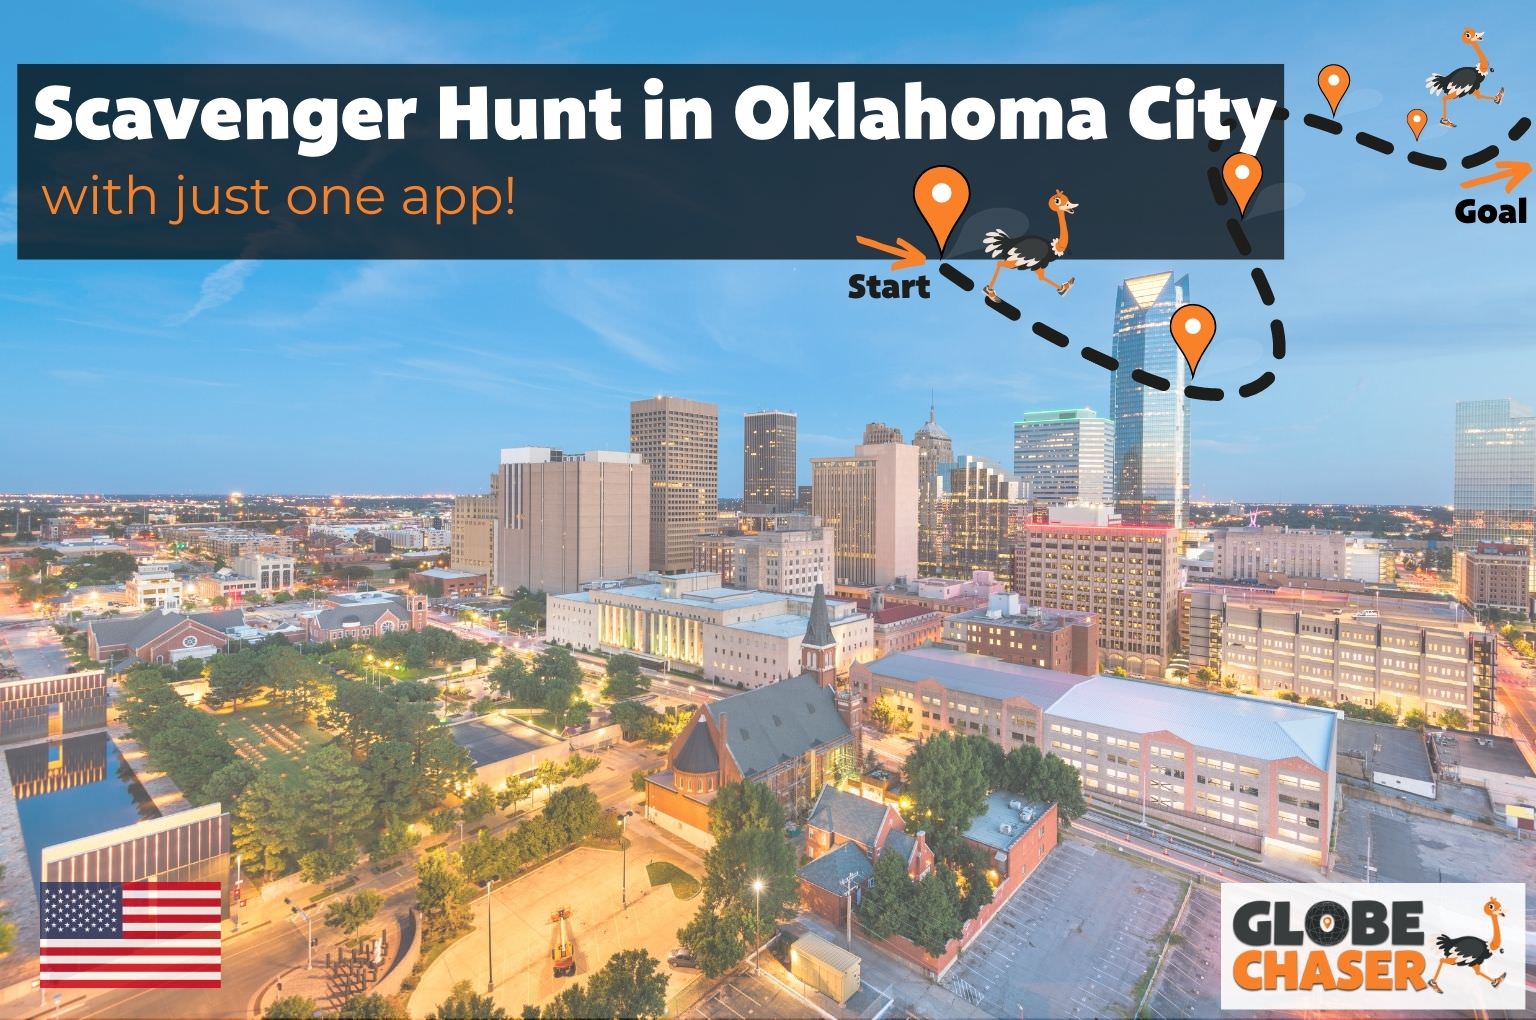 Scavenger Hunt in Oklahoma City, USA - Family Activities with the Globe Chaser App for Outdoor Fun